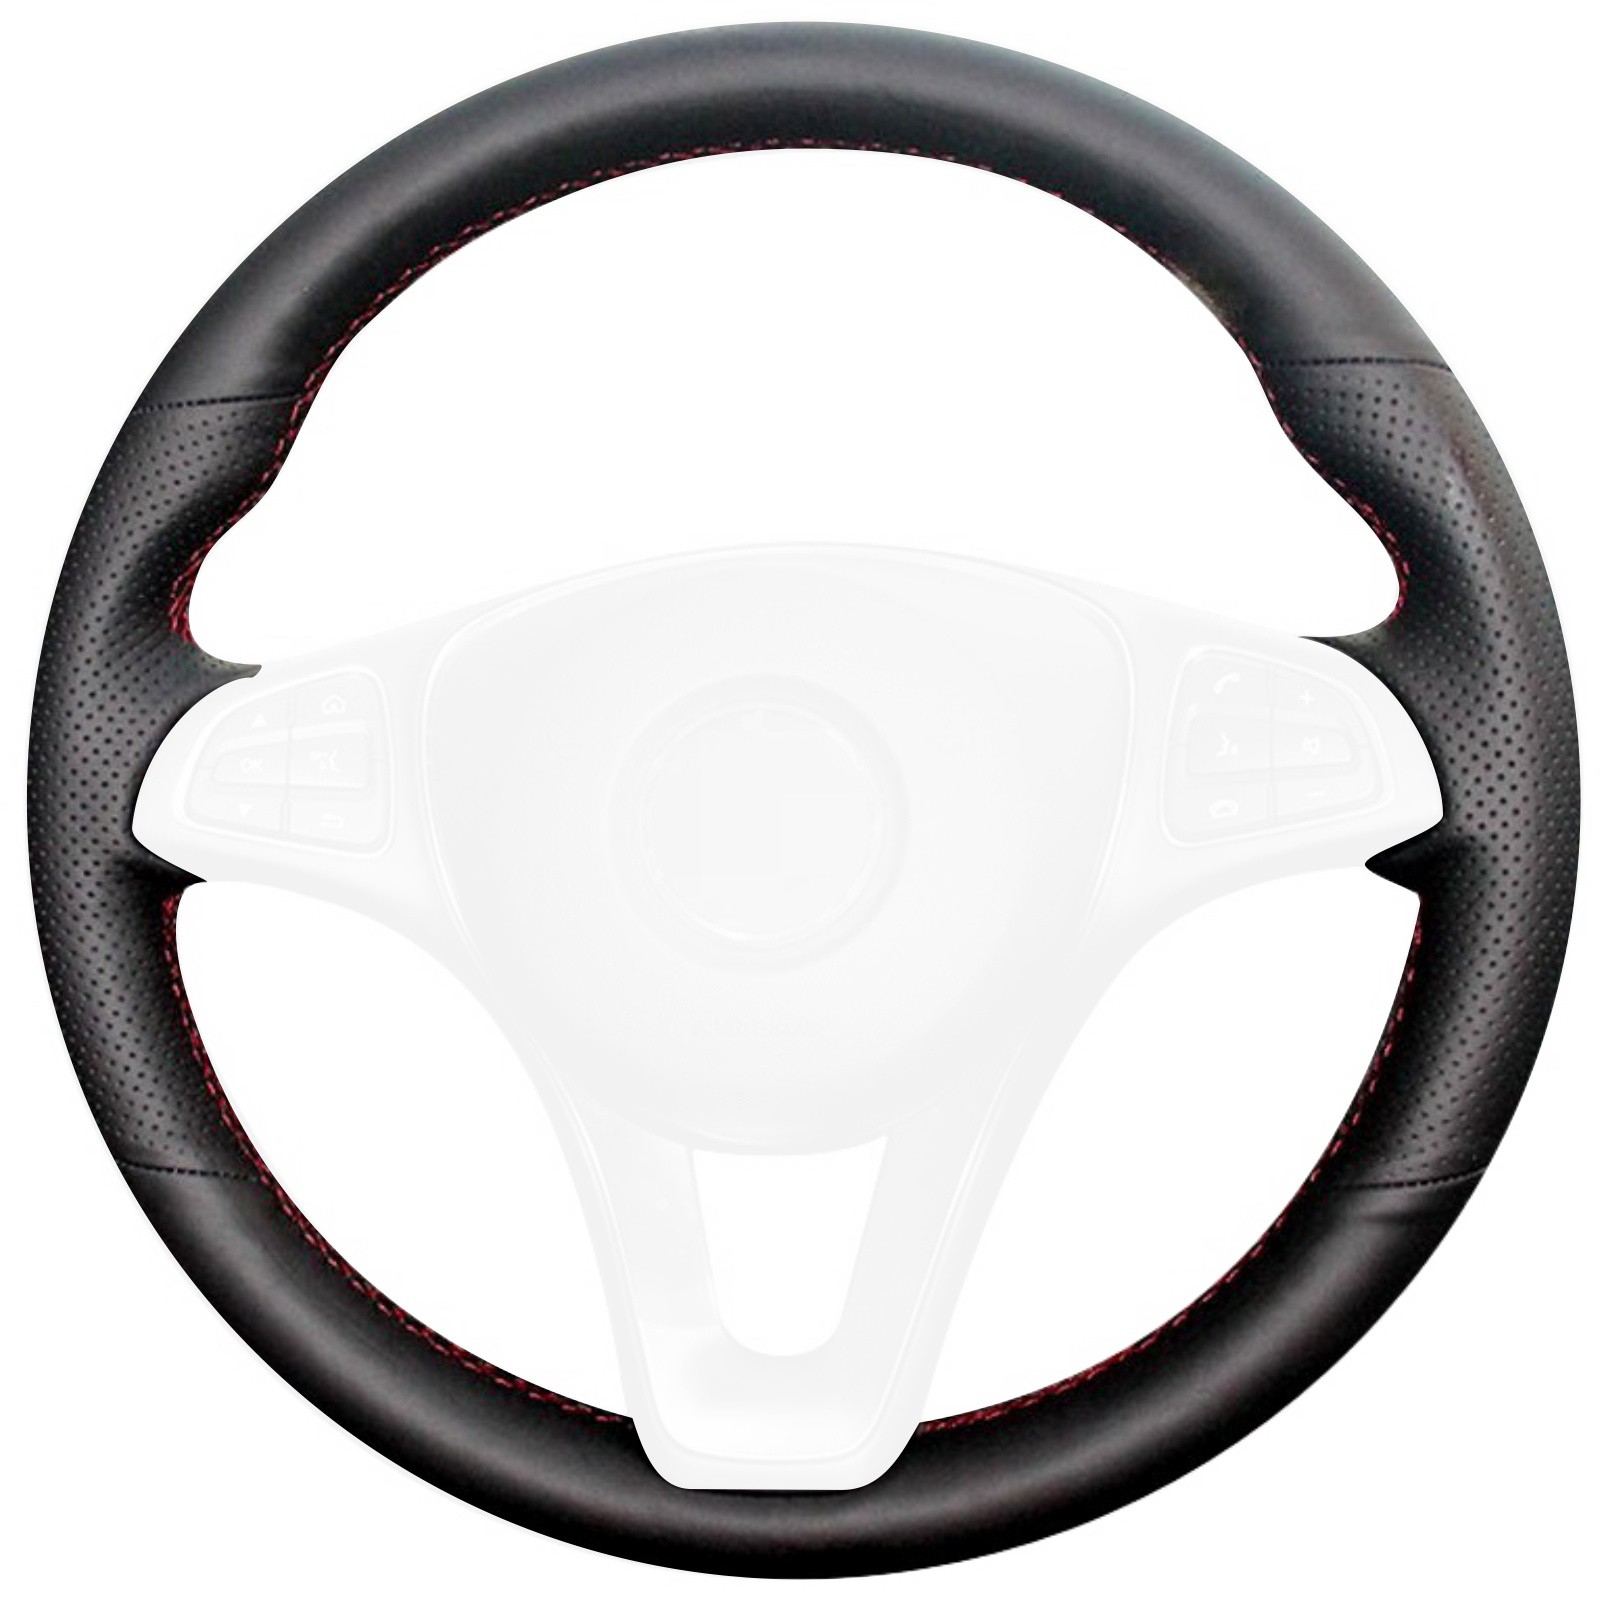 2012-18 Mercedes A-class W176 steering wheel cover